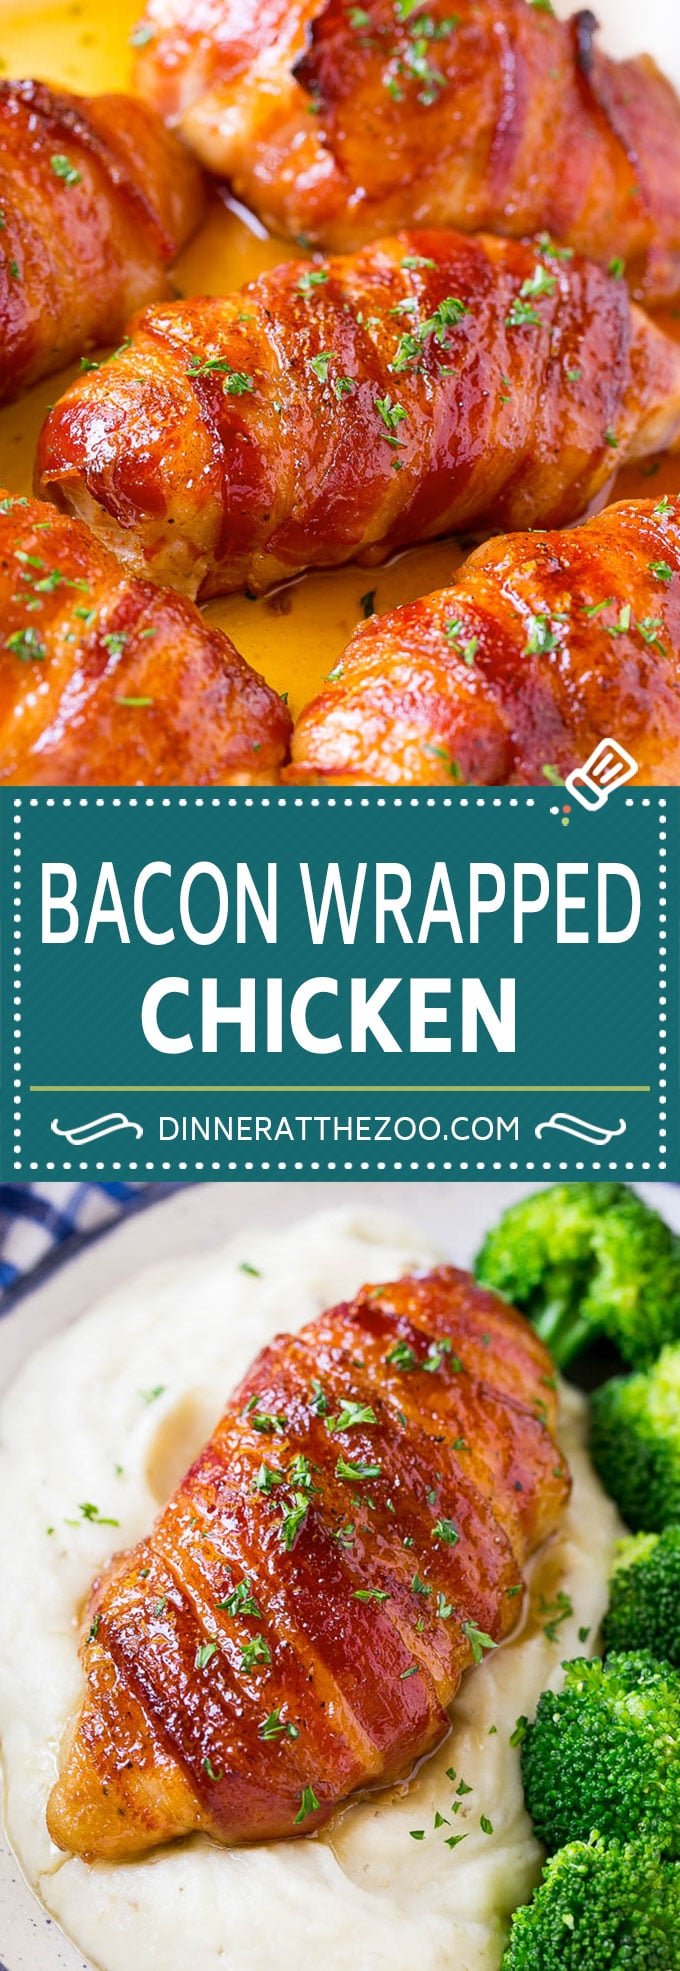 Bacon Wrapped Chicken Recipe | Bacon Wrapped Chicken Breast | Baked Bacon Wrapped Chicken | Bacon Brown Sugar Chicken #bacon #chicken #dinner #dinneratthezoo